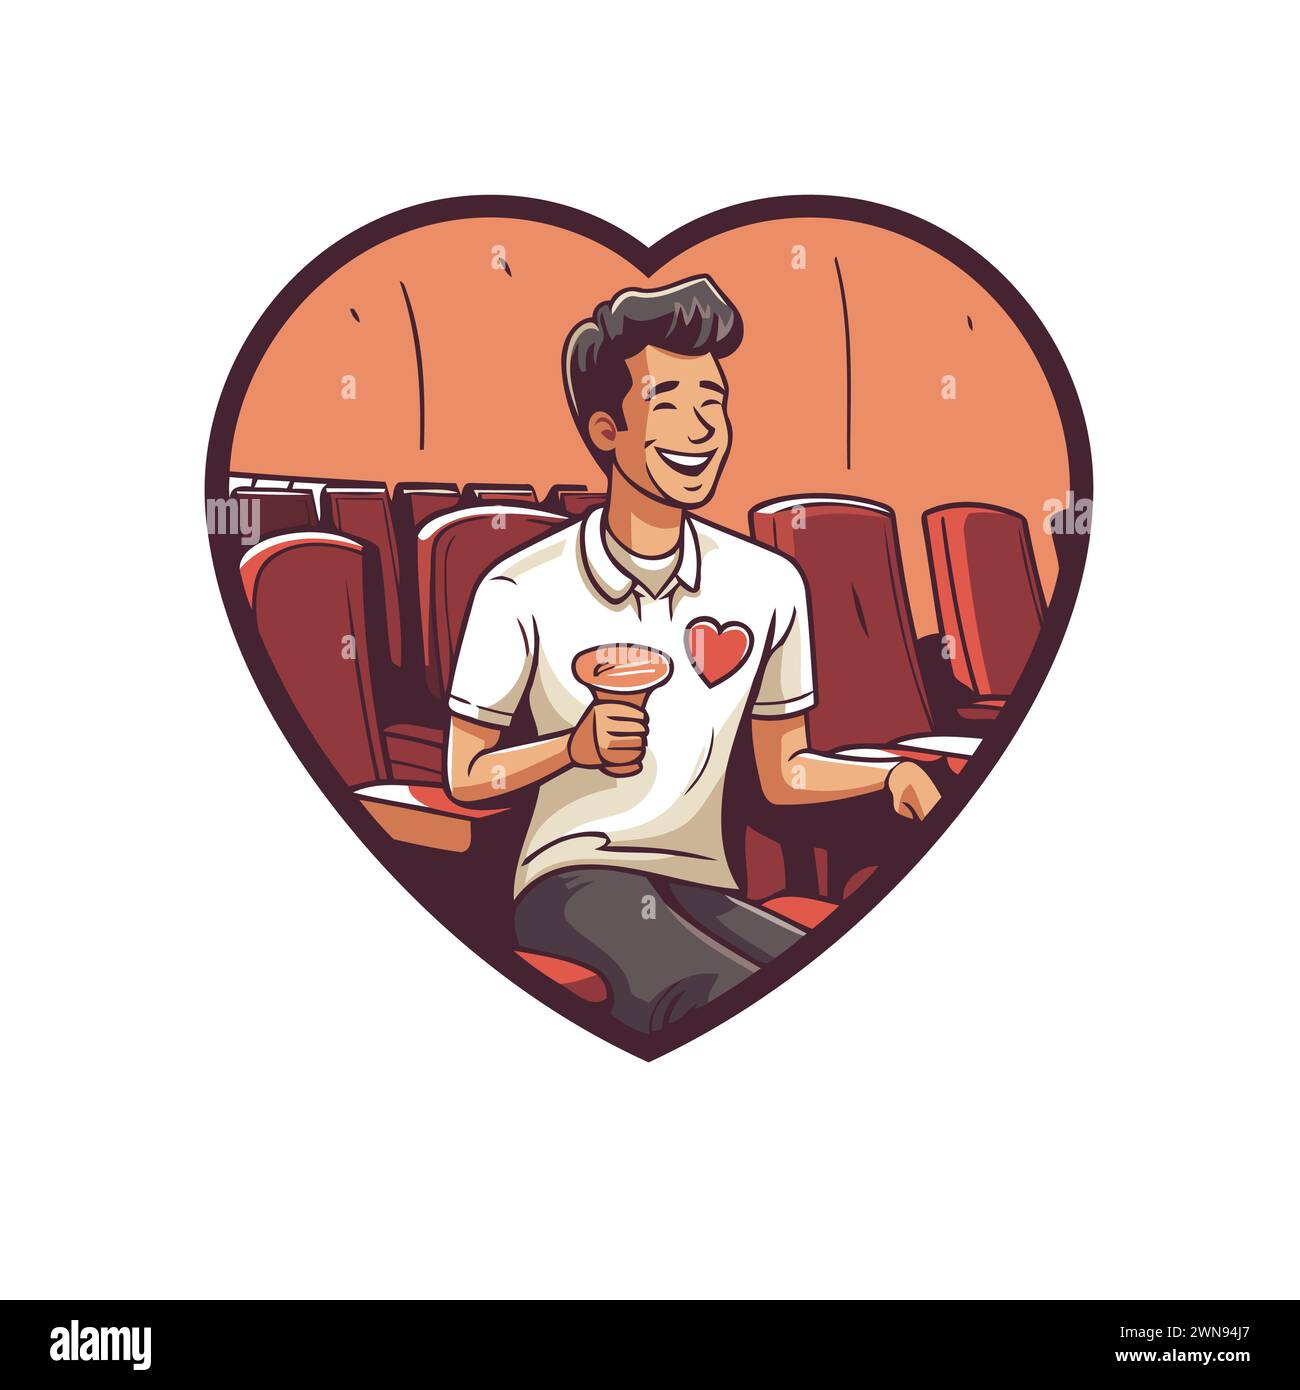 Illustration Of A Man Drinking Coffee While Watching Movie In Cinema Set Inside Heart Shape On 0869